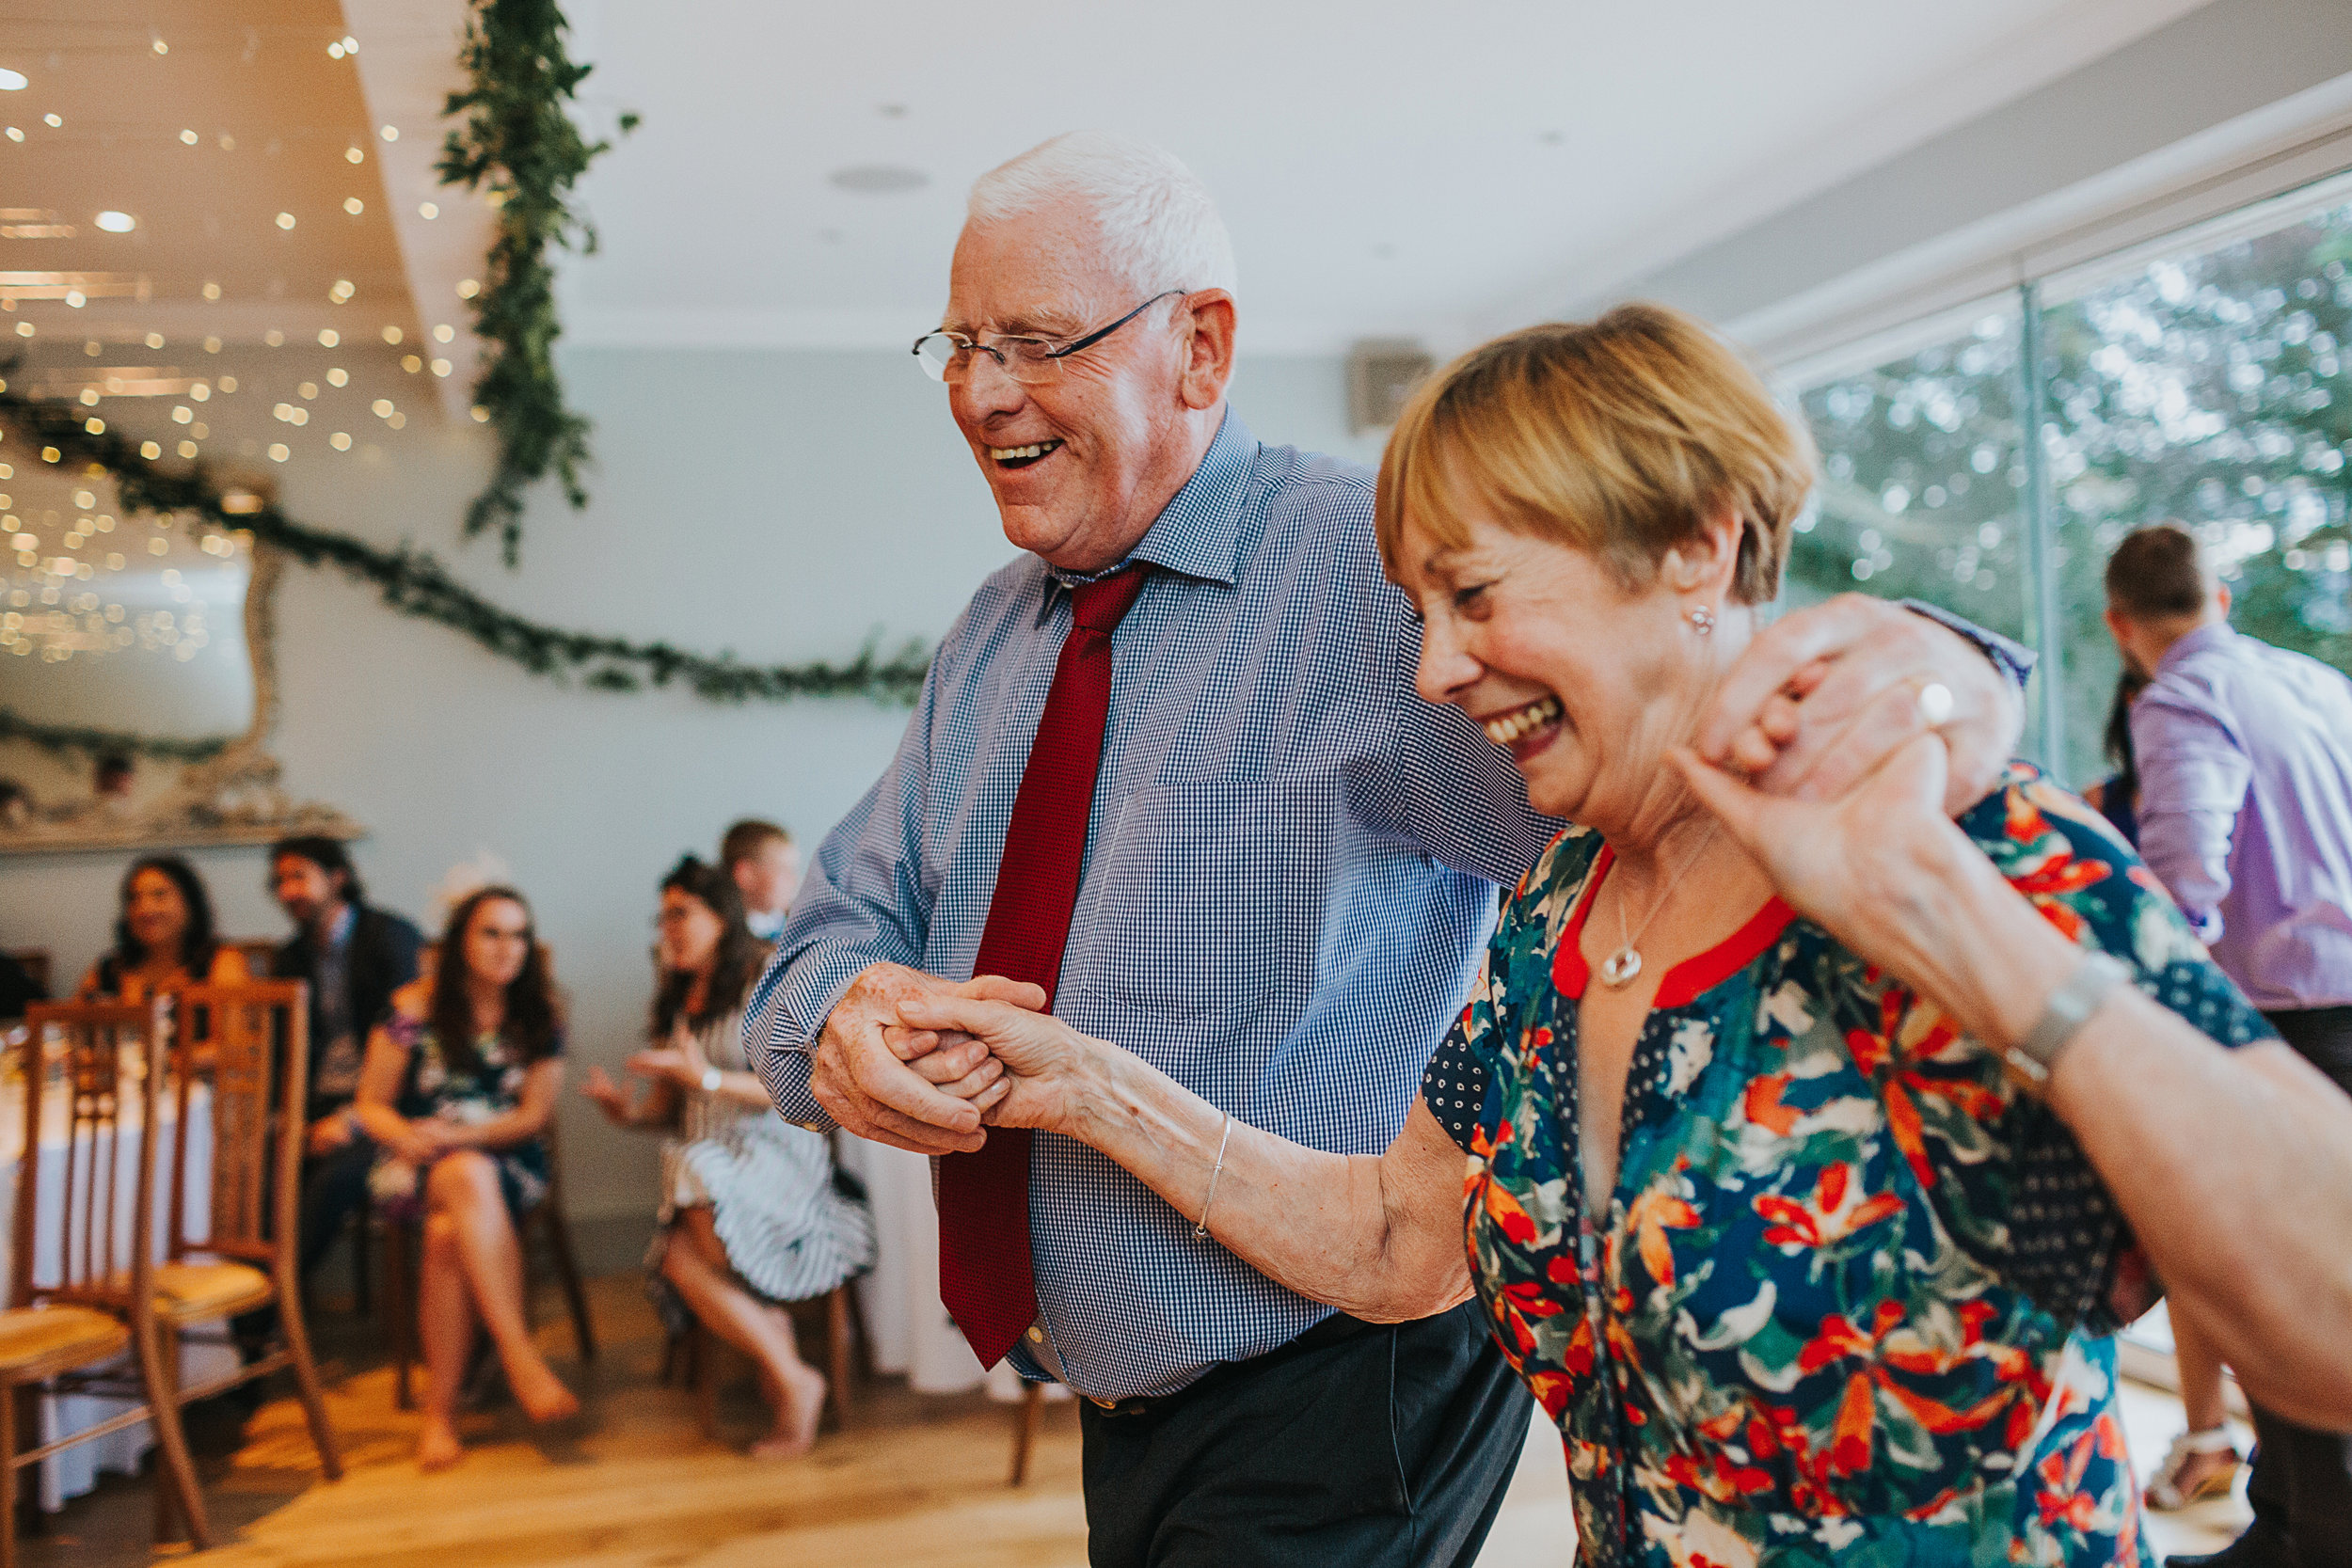 Older couple laughing and dancing together. 